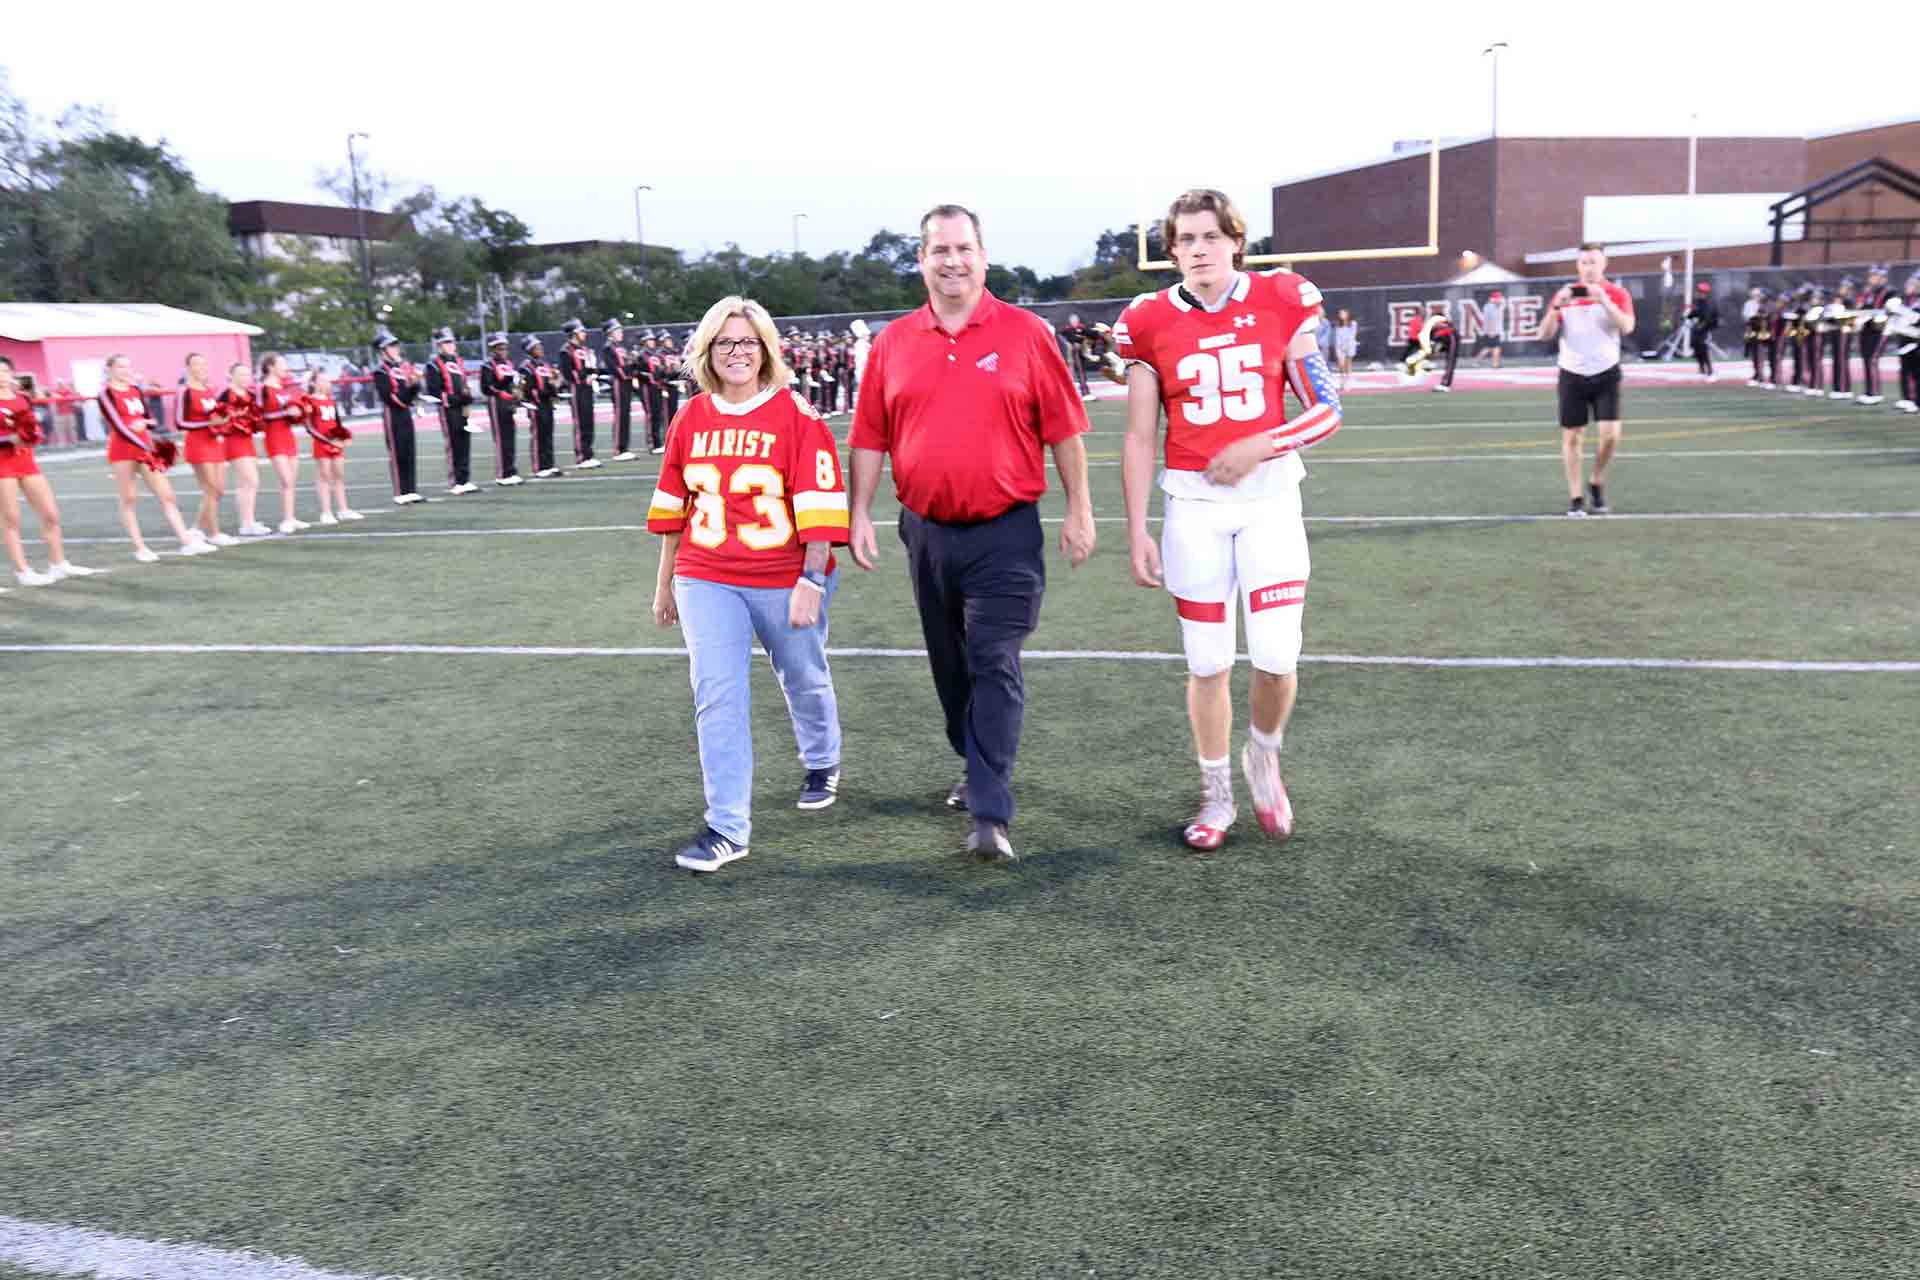 2021-hall-of-fame-ceremony-matt-quinn-walking-with-family-on-field